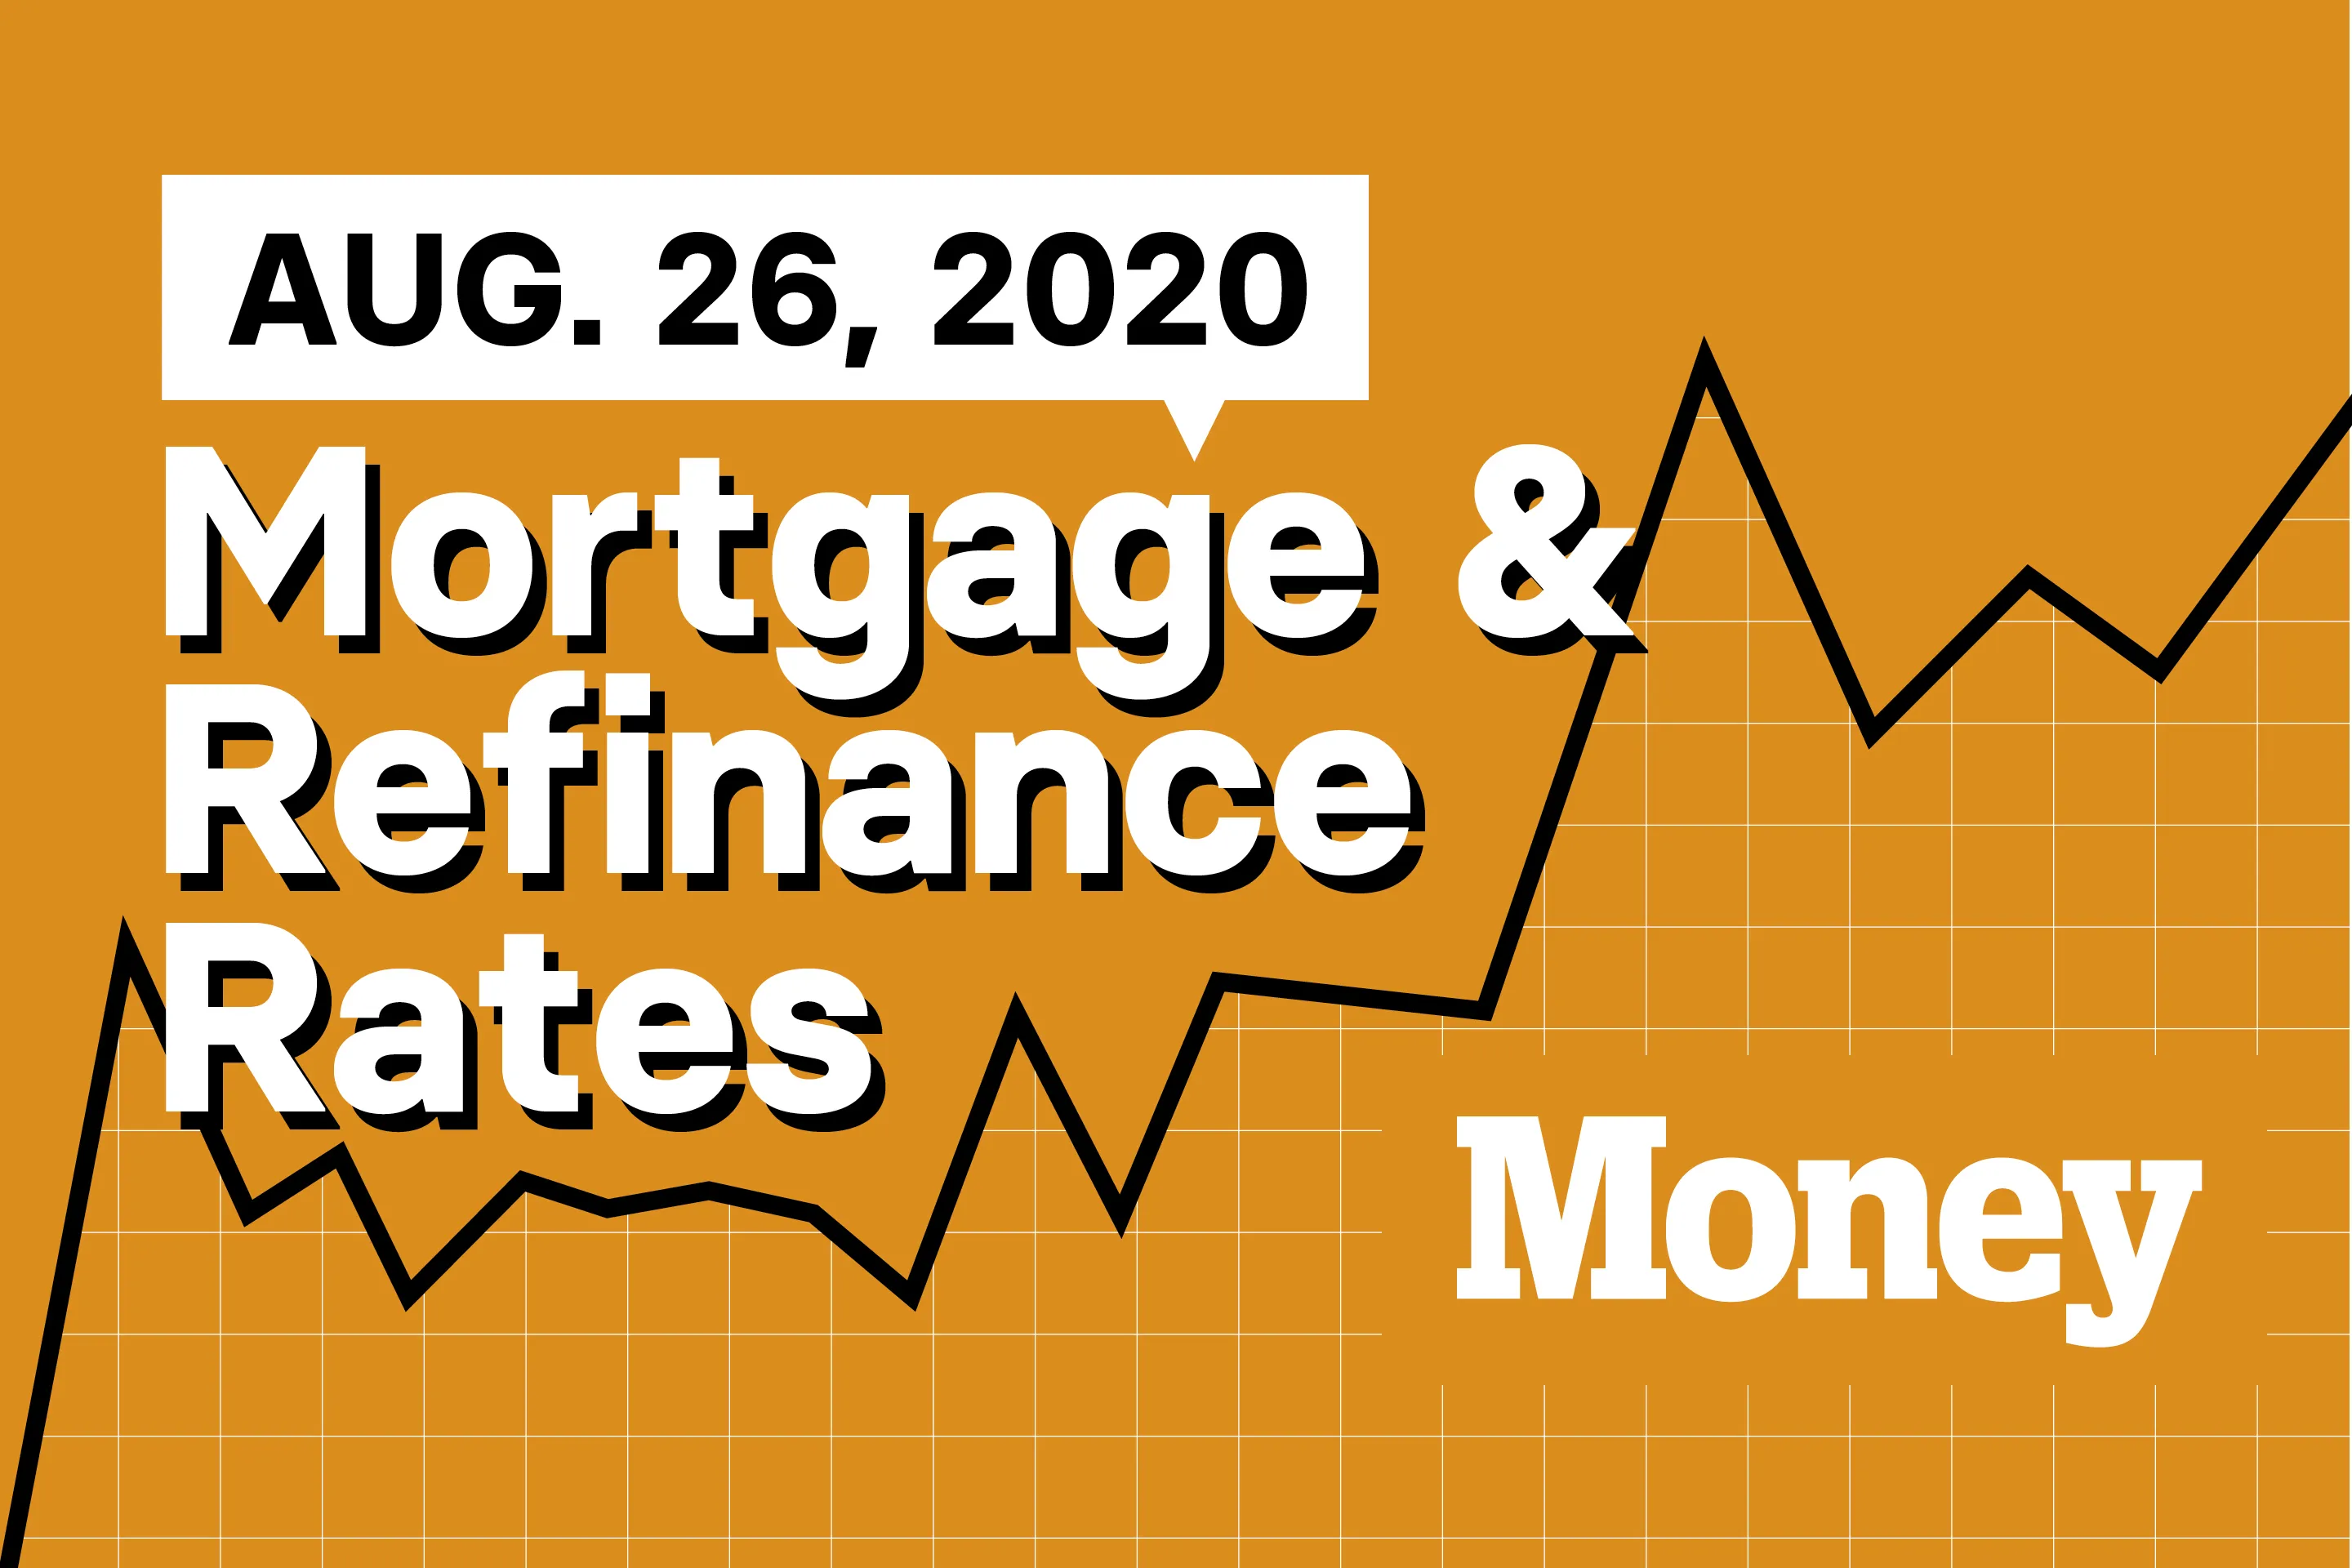 Here Are Today's Best Mortgage & Refinance Rates for August 26, 2020